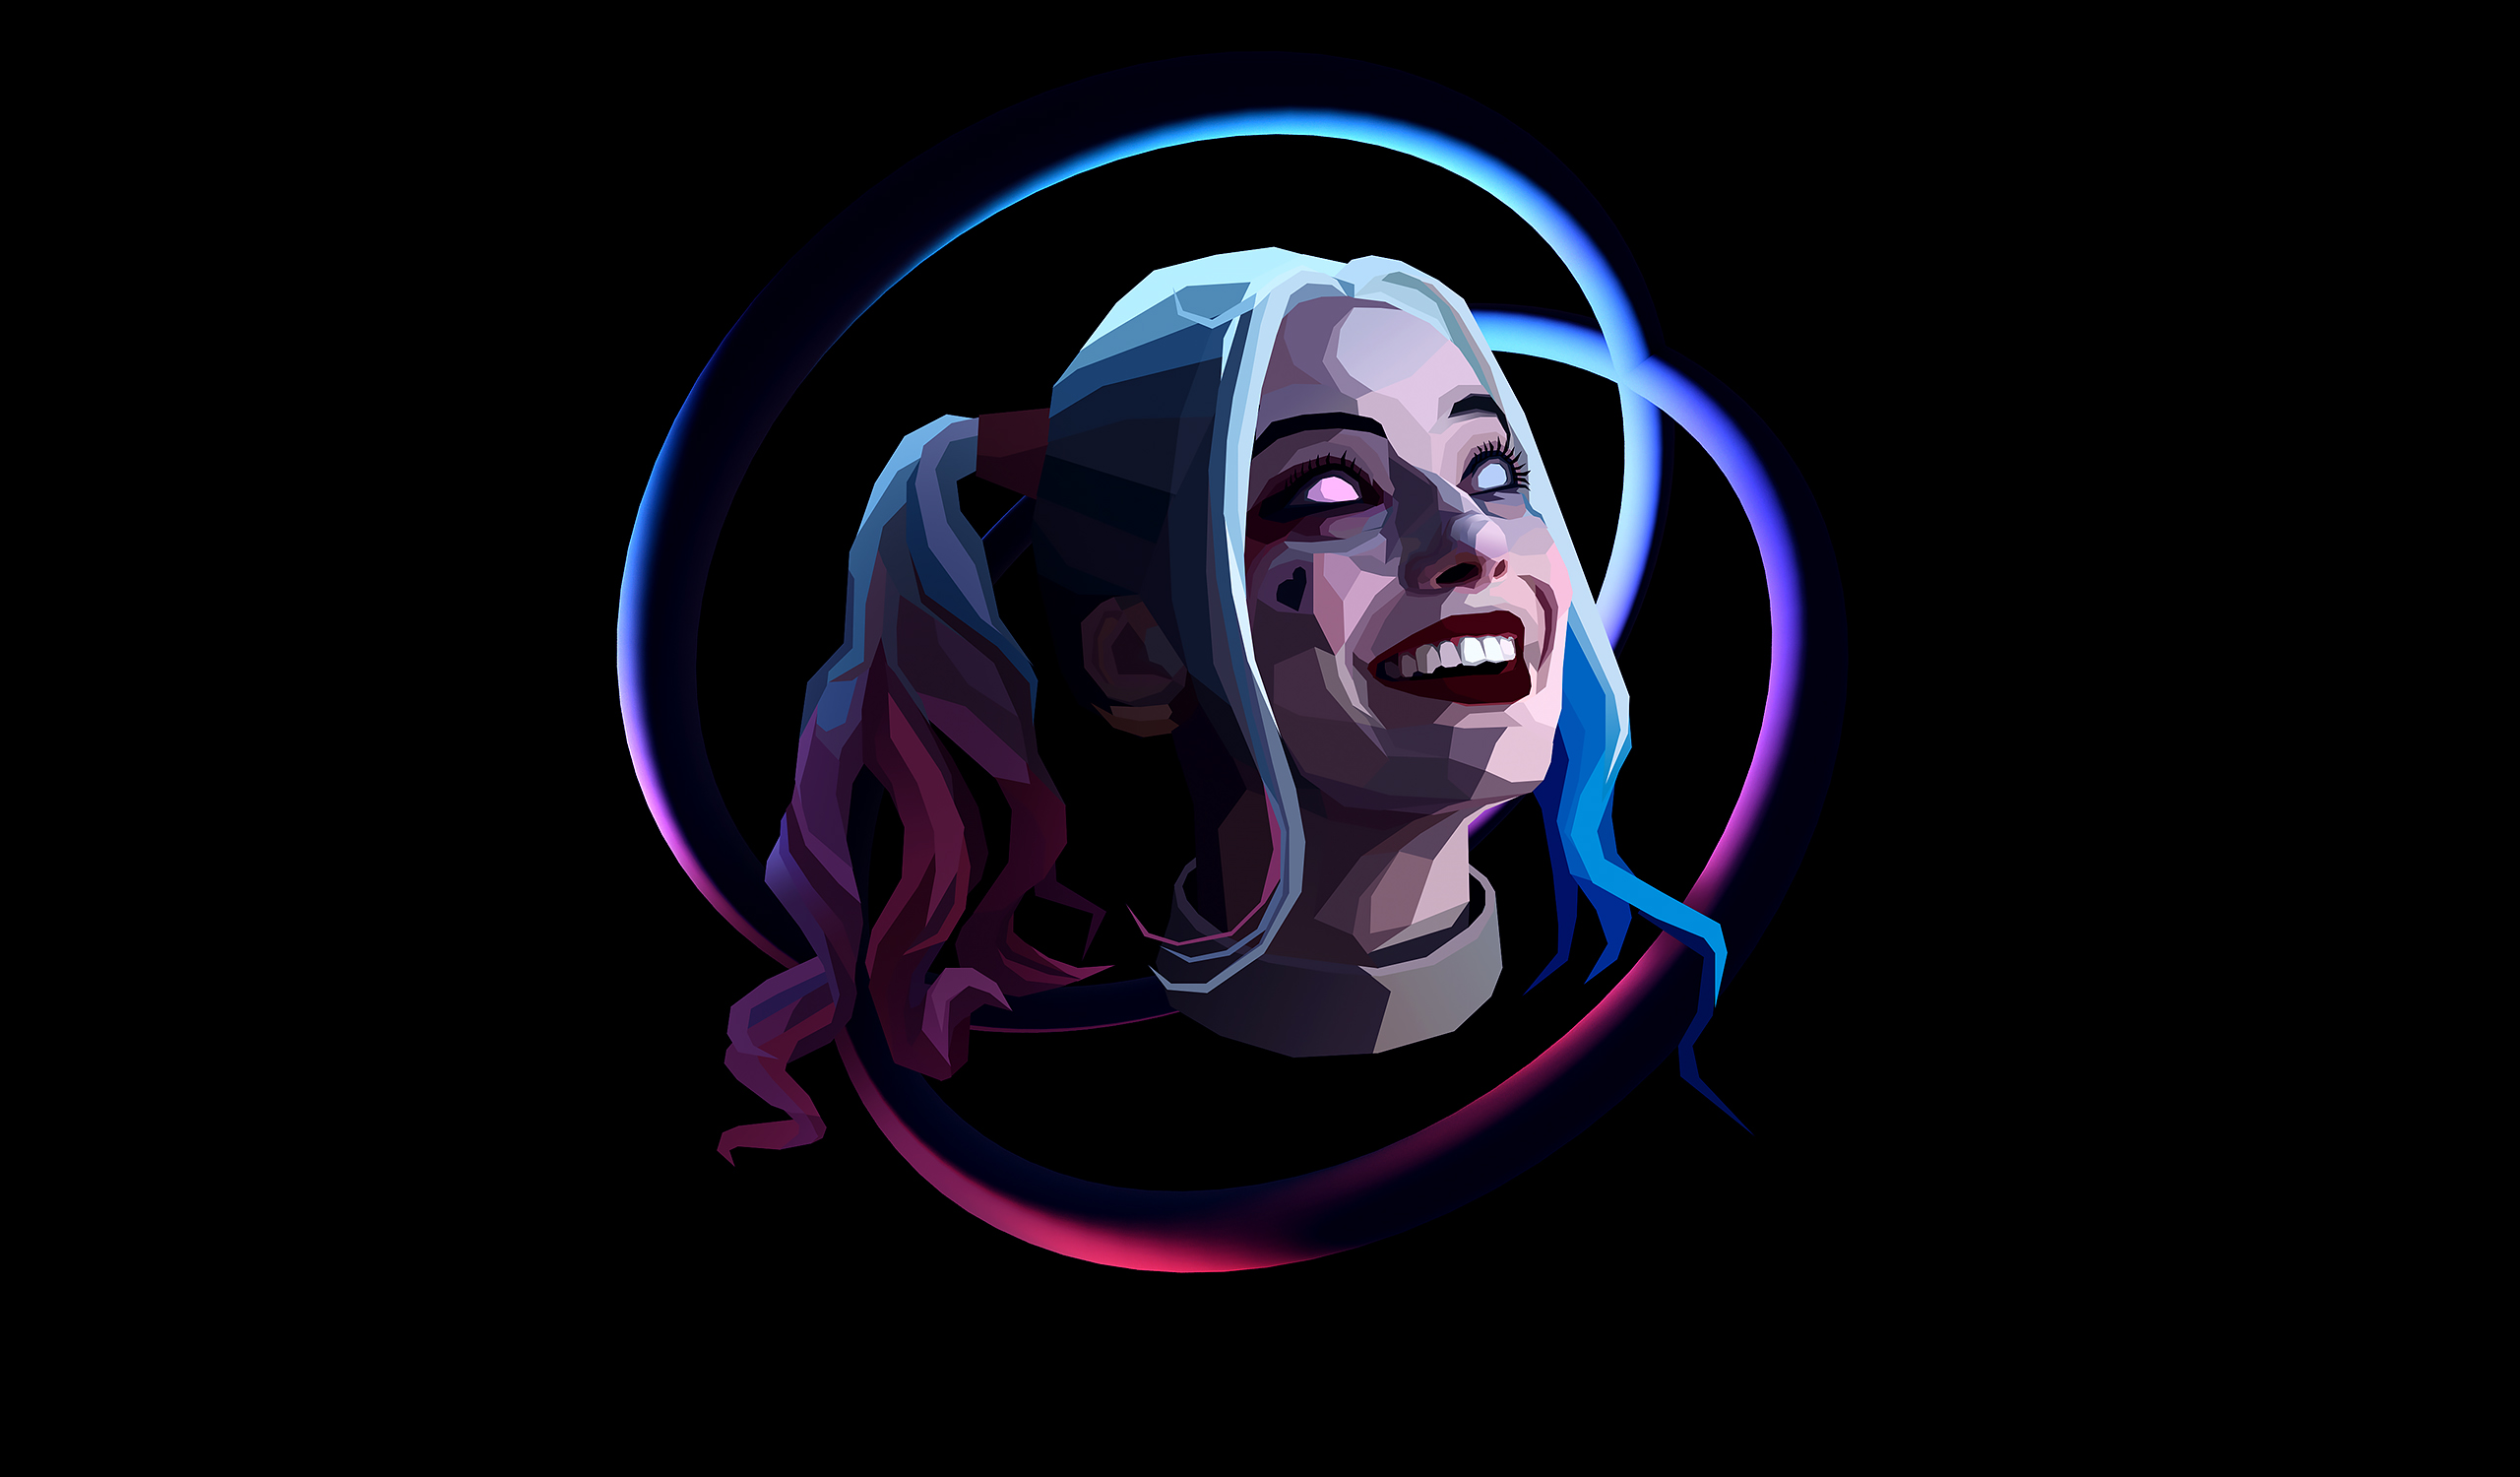 People 2560x1500 Harley Quinn digital art artwork abstract face simple background black background dark background turtlenecks long hair twintails dyed hair blue red purple lipstick red lipstick looking up wavy hair smiling colorful women